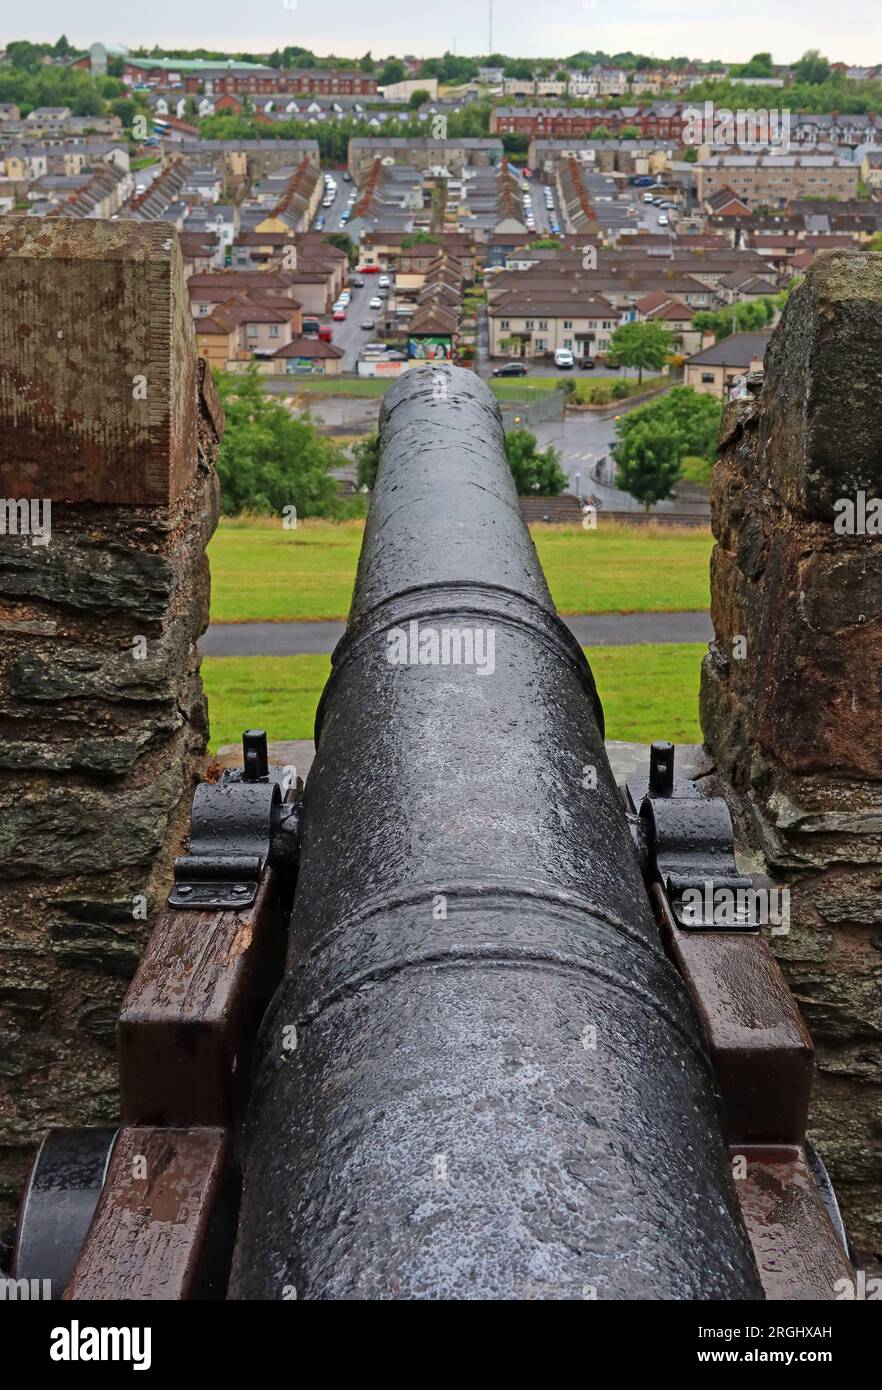 Historic Cannons on the Londonderry walls, pointing out from the city, County Derry, Northern Ireland, UK, BT48 6PJ Stock Photo